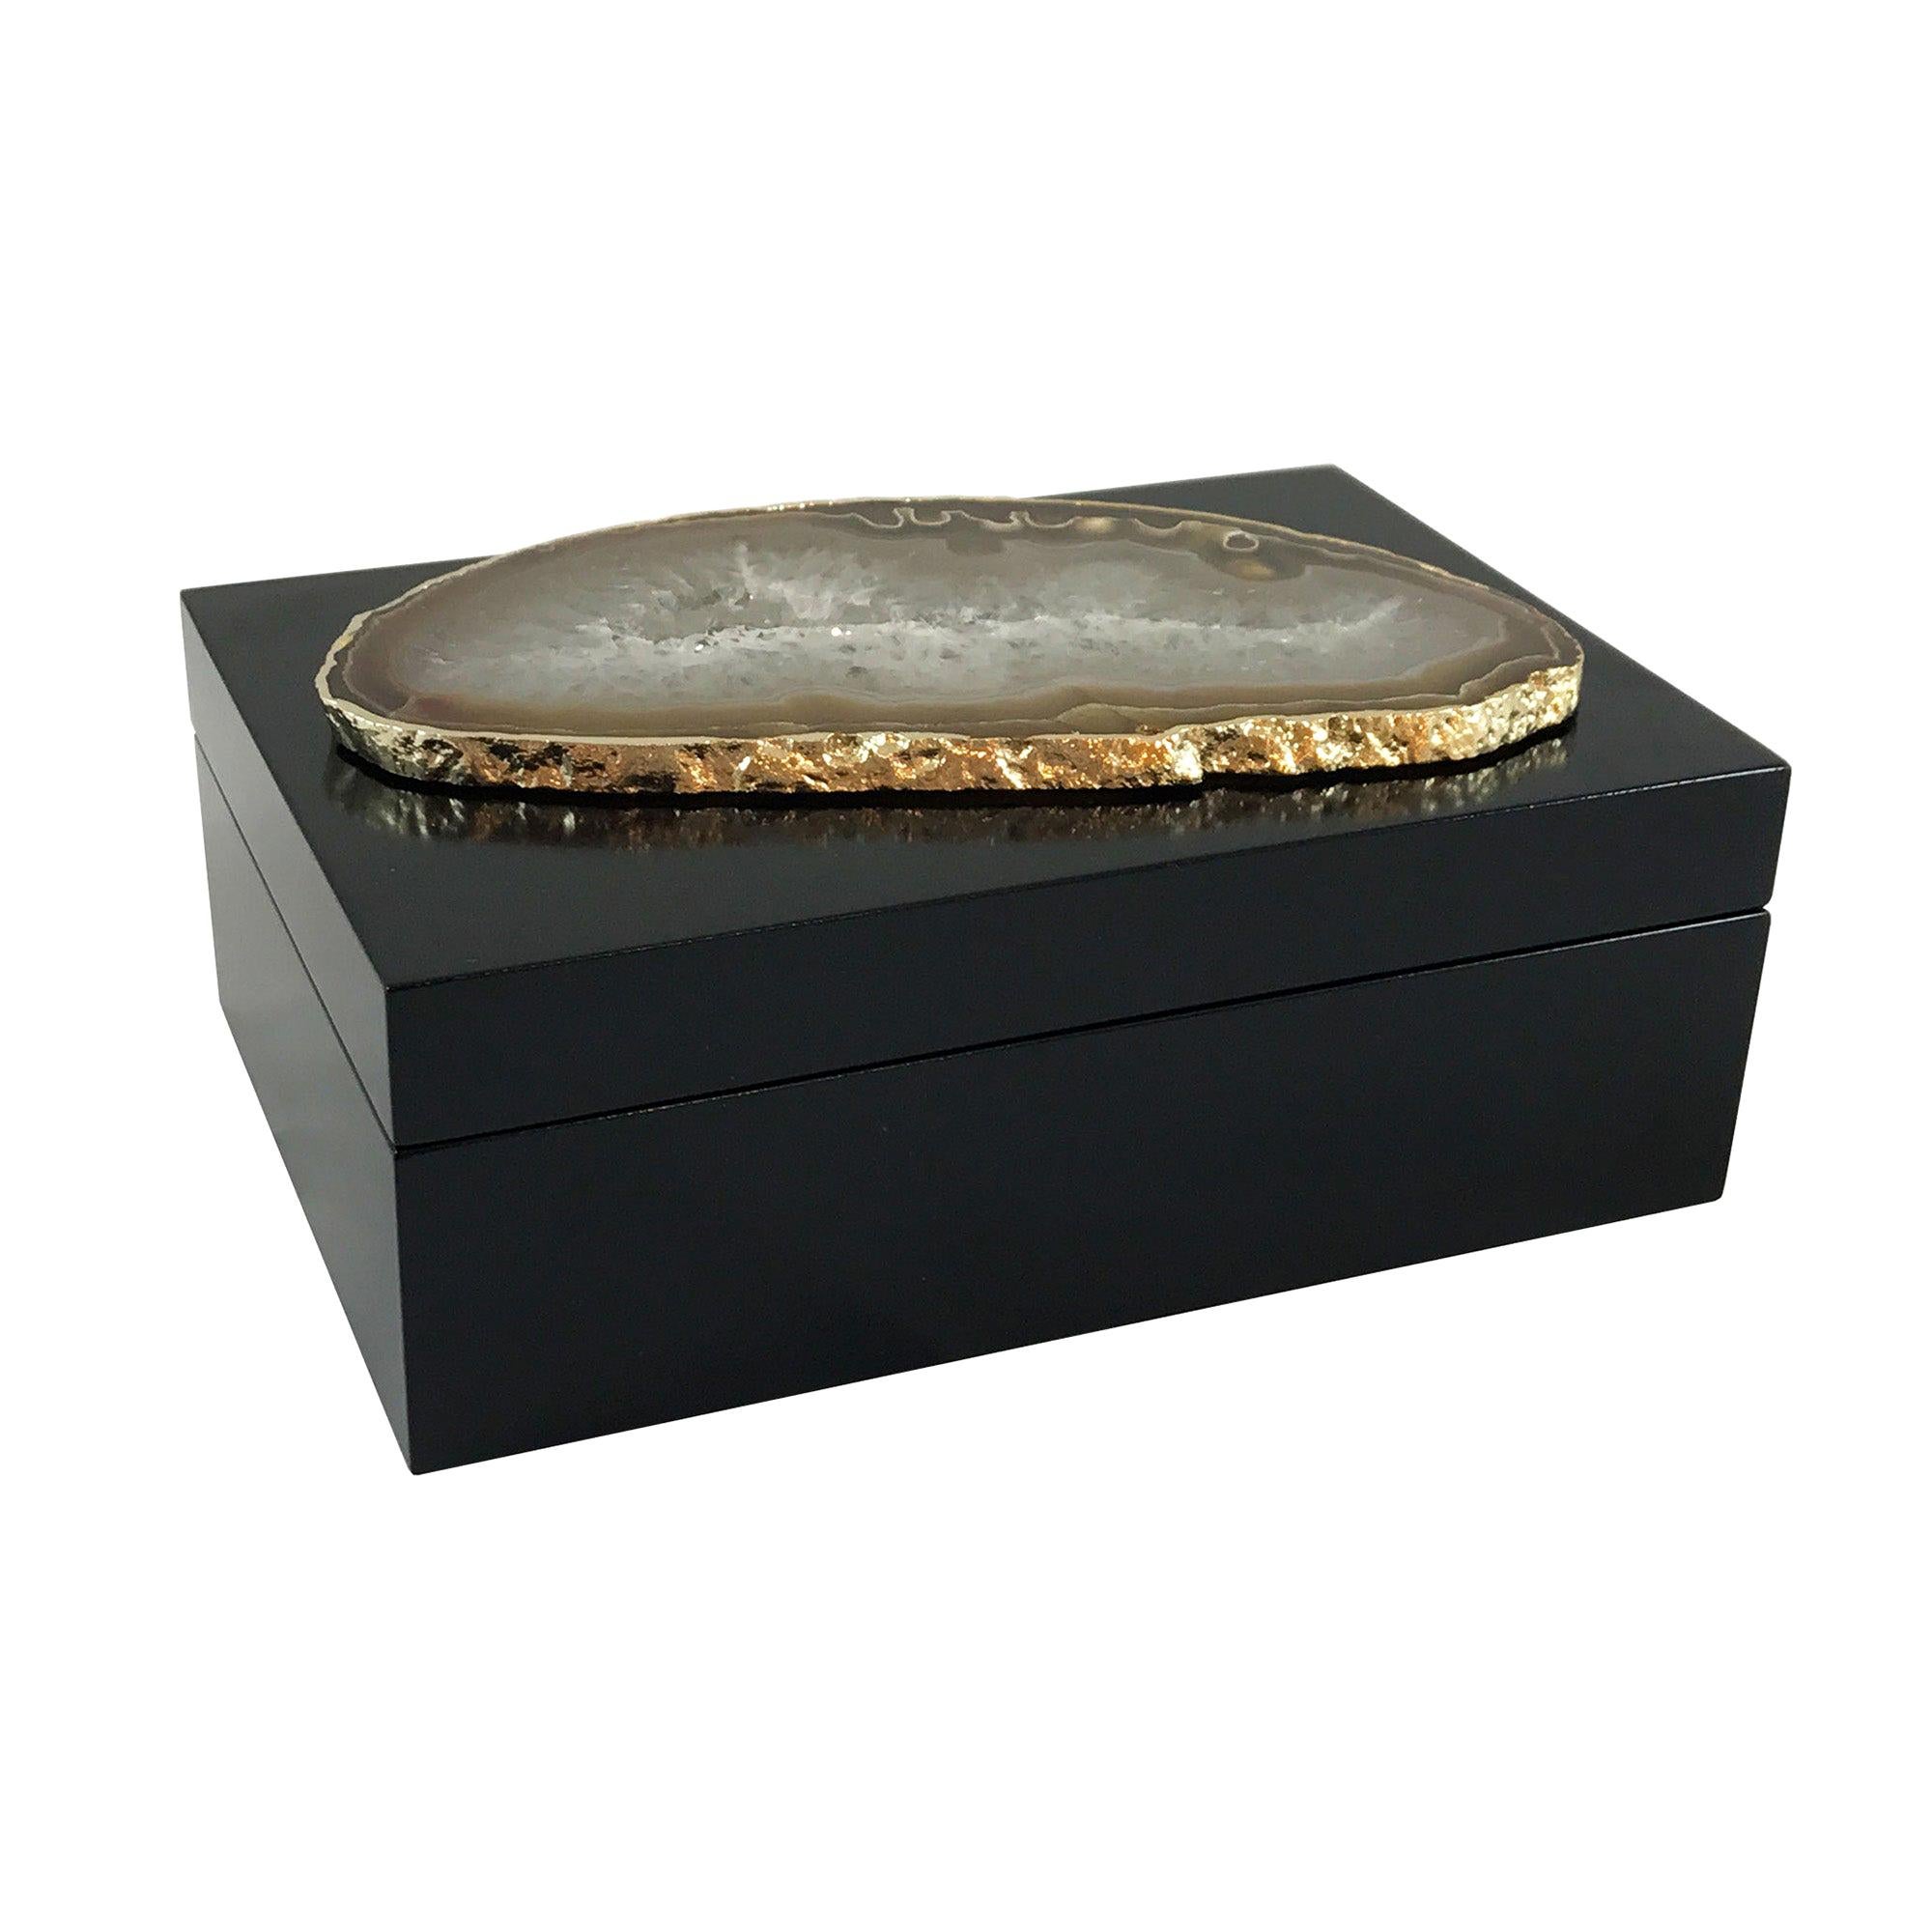 Guilherme Large Agate Box in Black and Gold by CuratedKravet